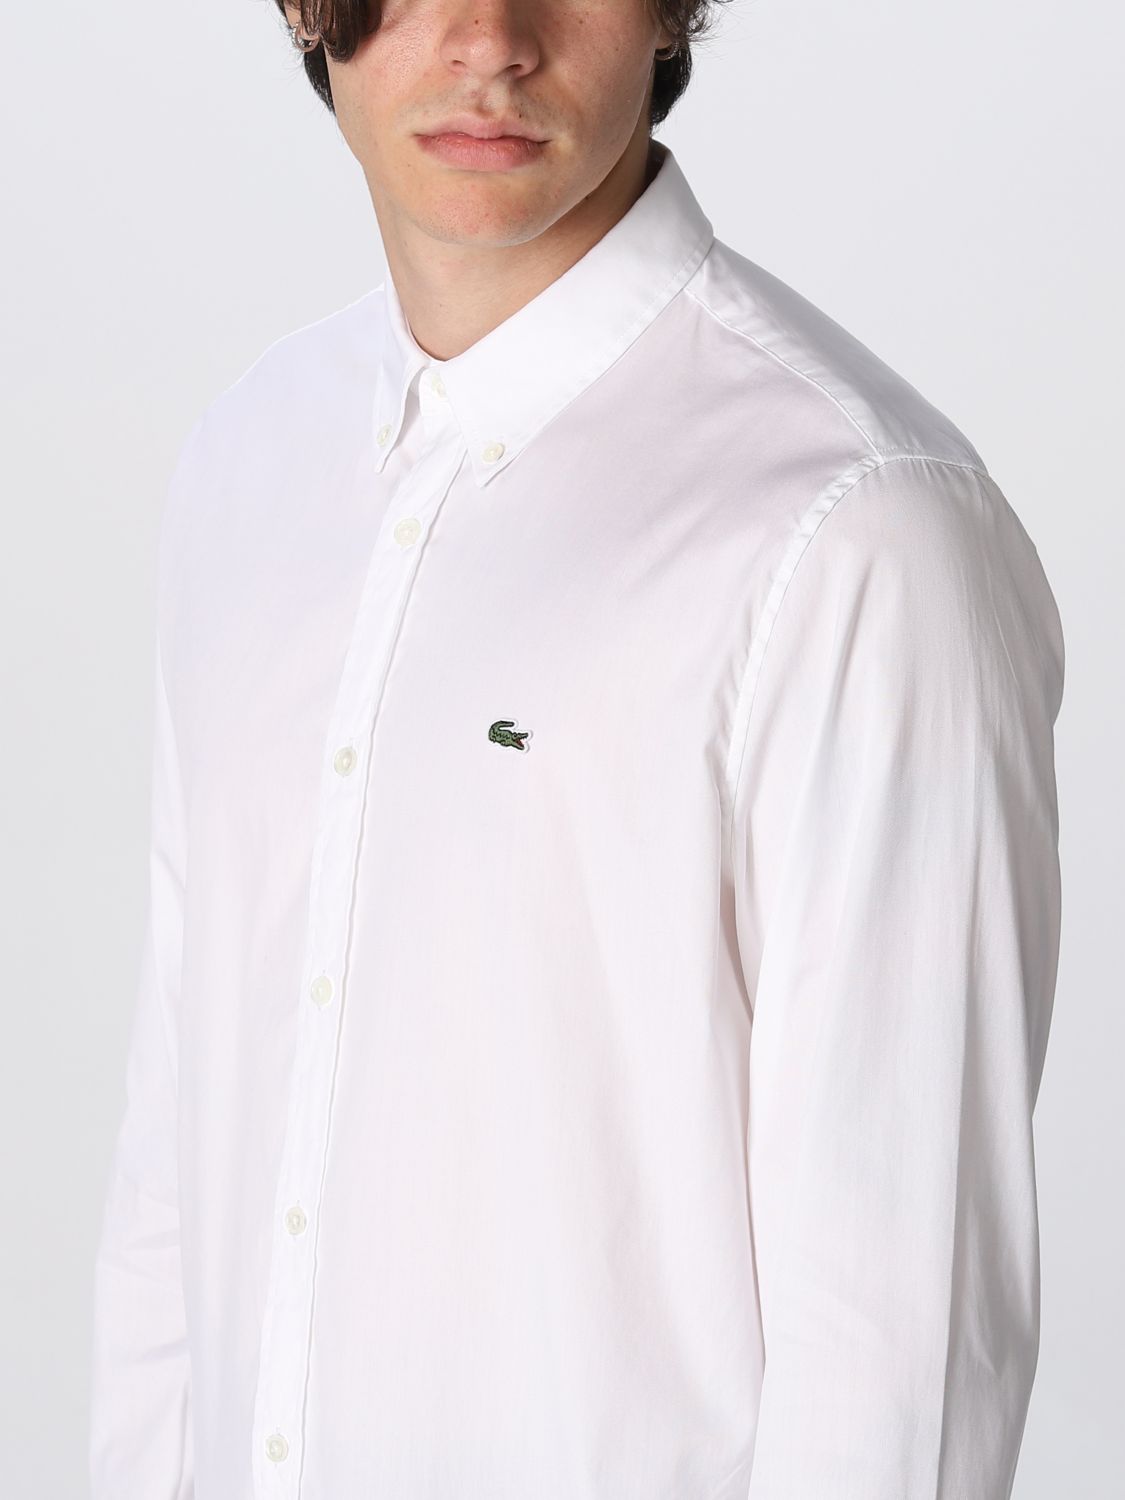 for man - White | Lacoste shirt CH2933 online on